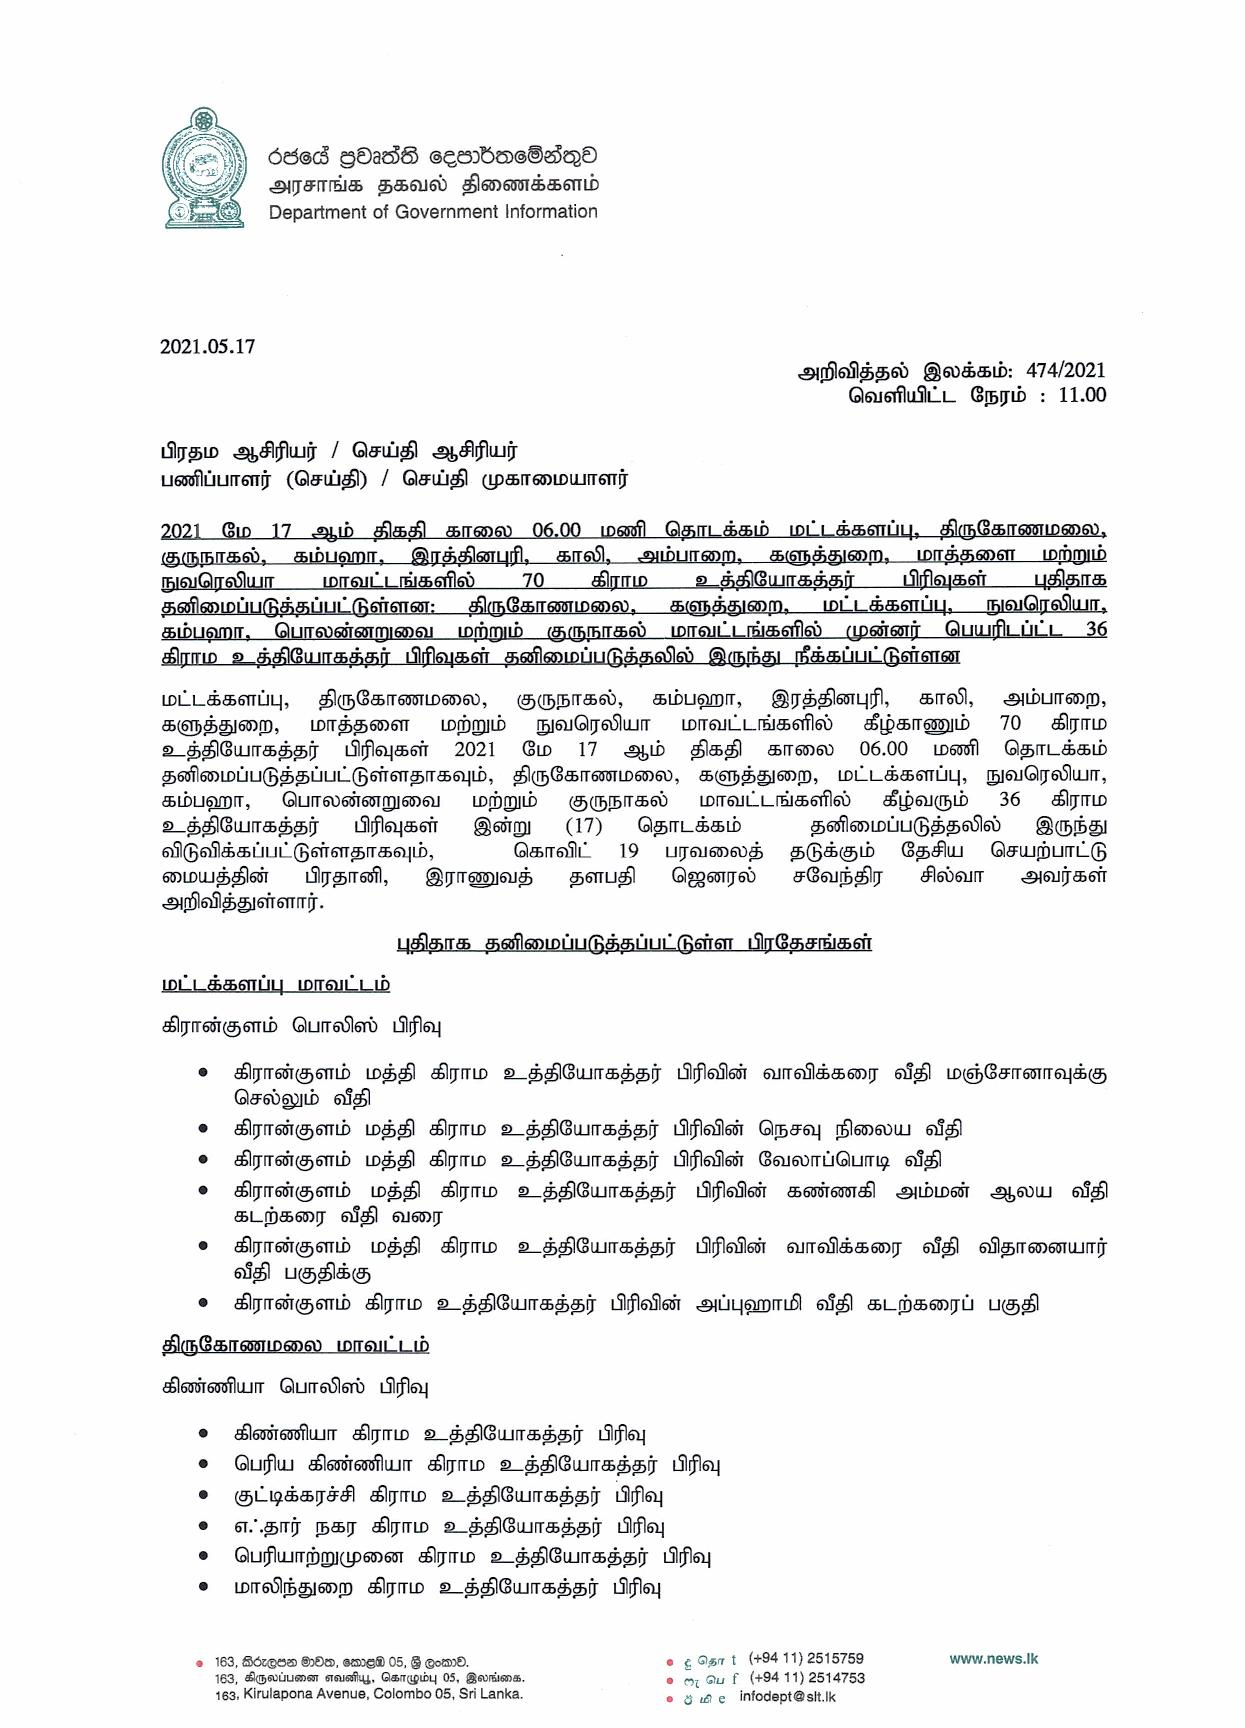 Release No 474 Tamil page 001